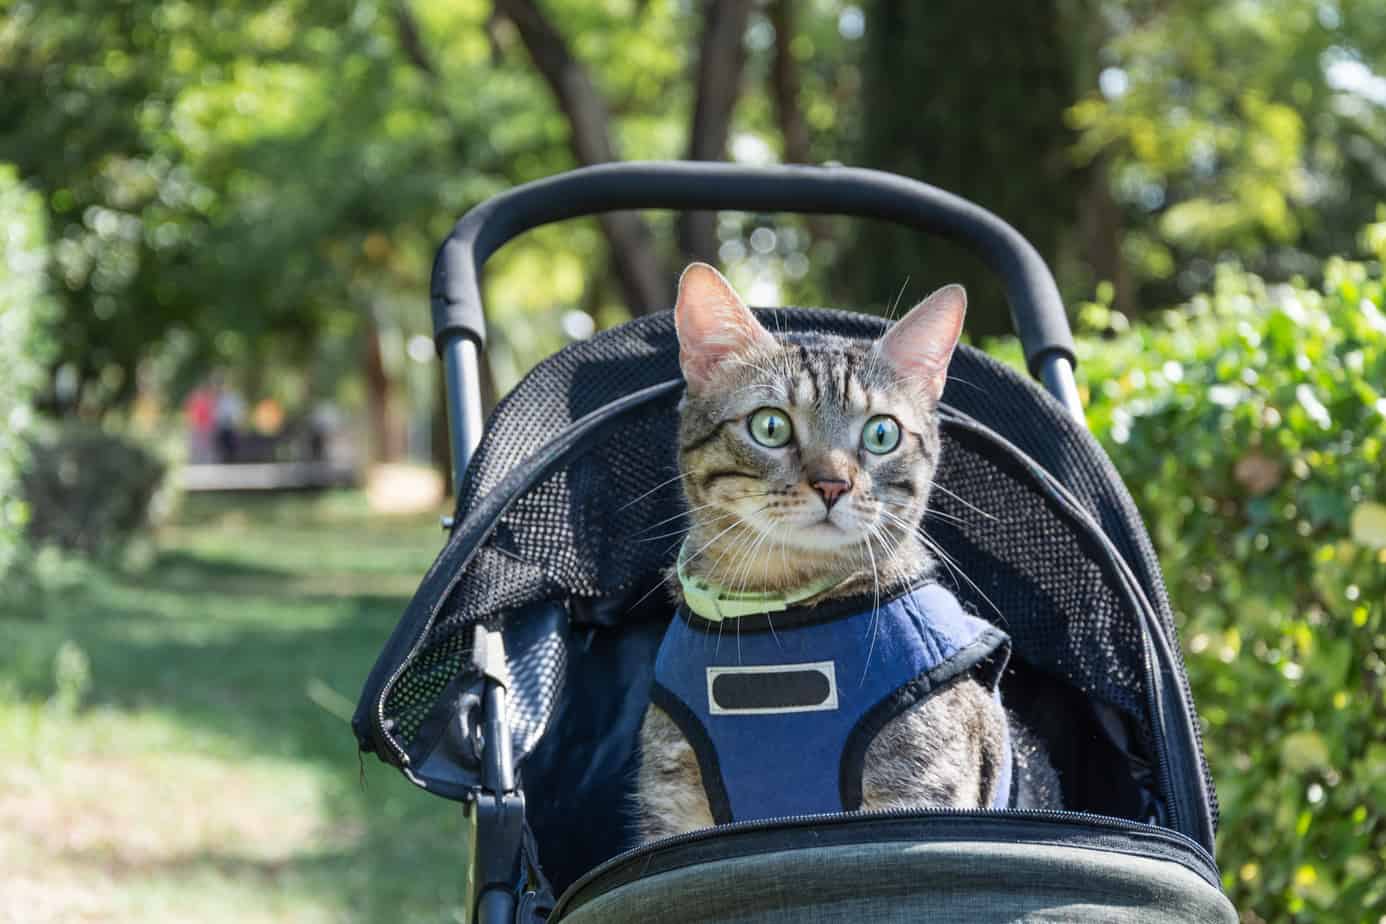 Do Cats Like Going For Walks In Strollers